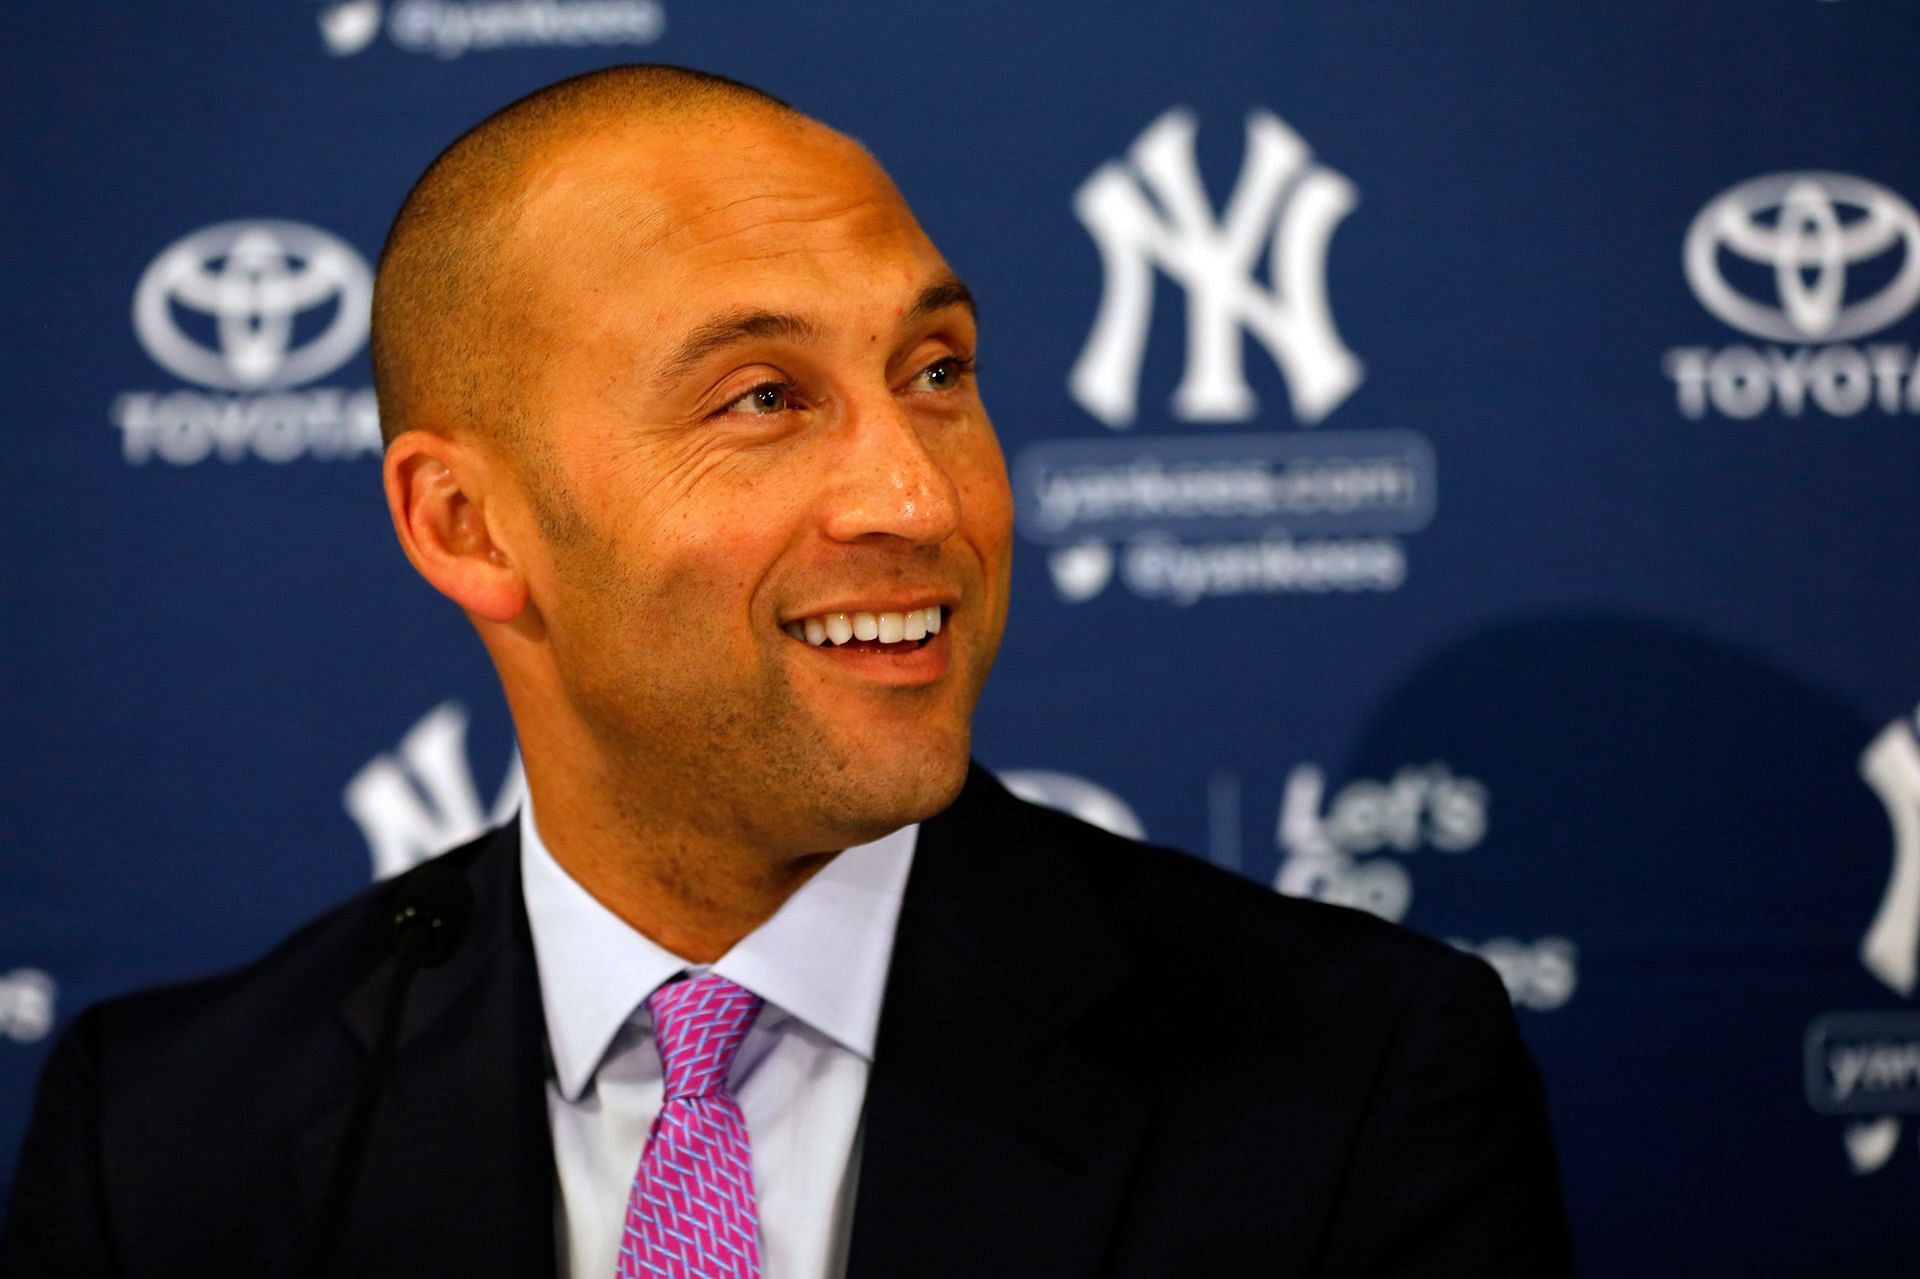 Derek Jeter Brings Wife and Daughters to Hall of Fame Induction